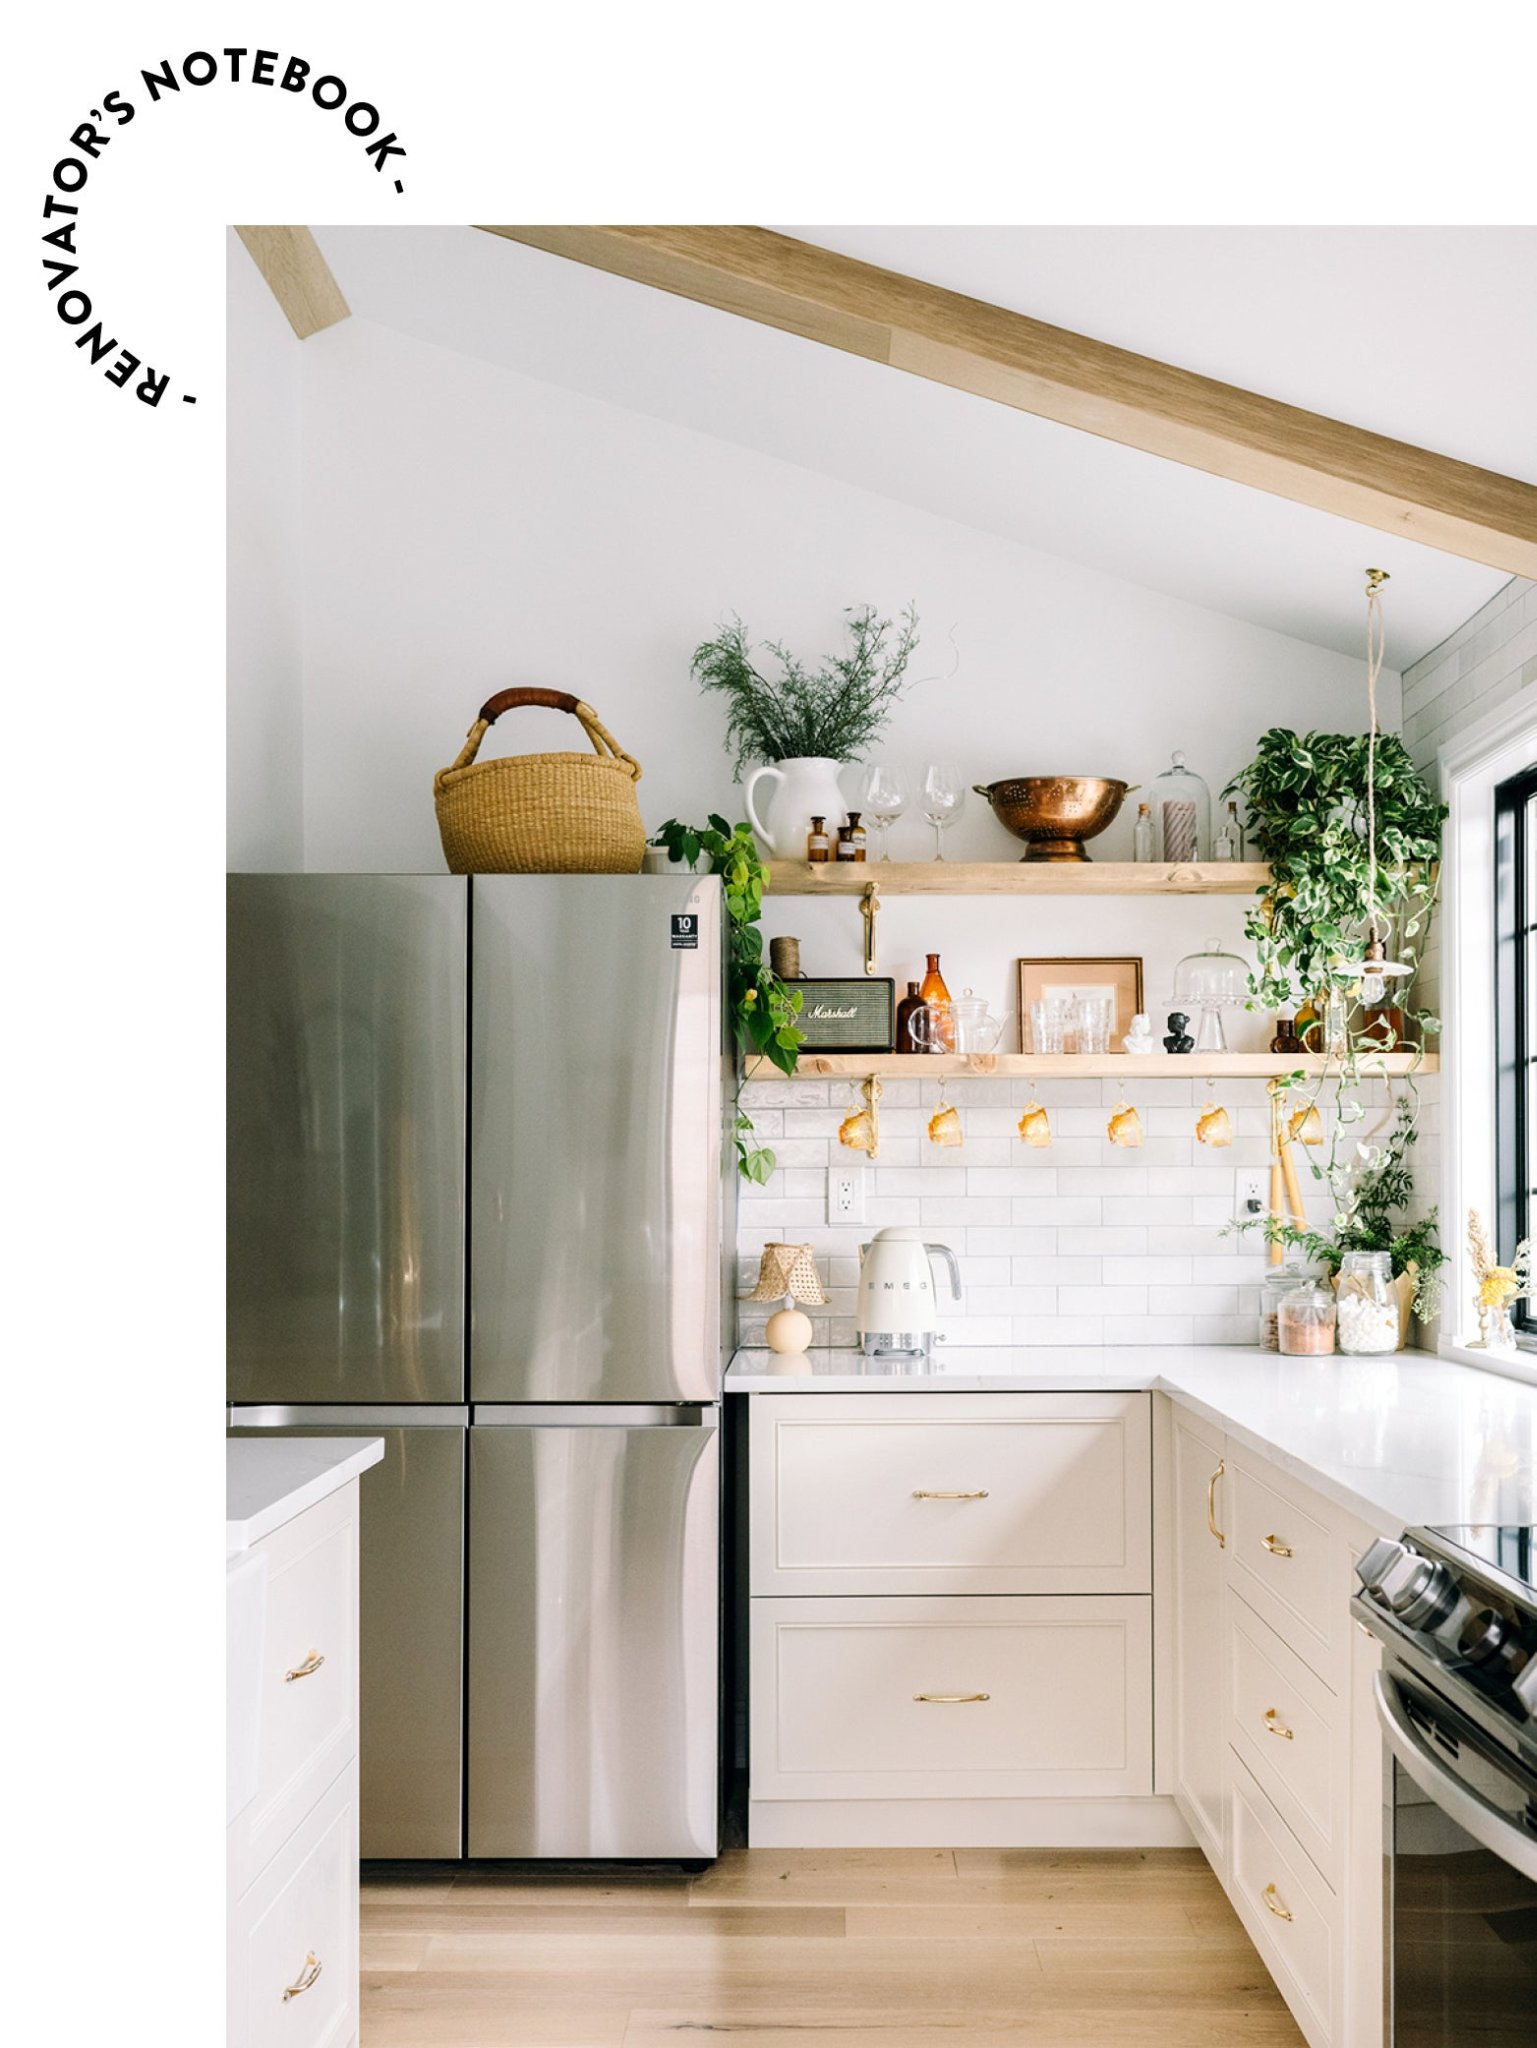 A $10K Appliance Package and $200 Shelves Helped Me Save on My Toronto Kitchen Reno